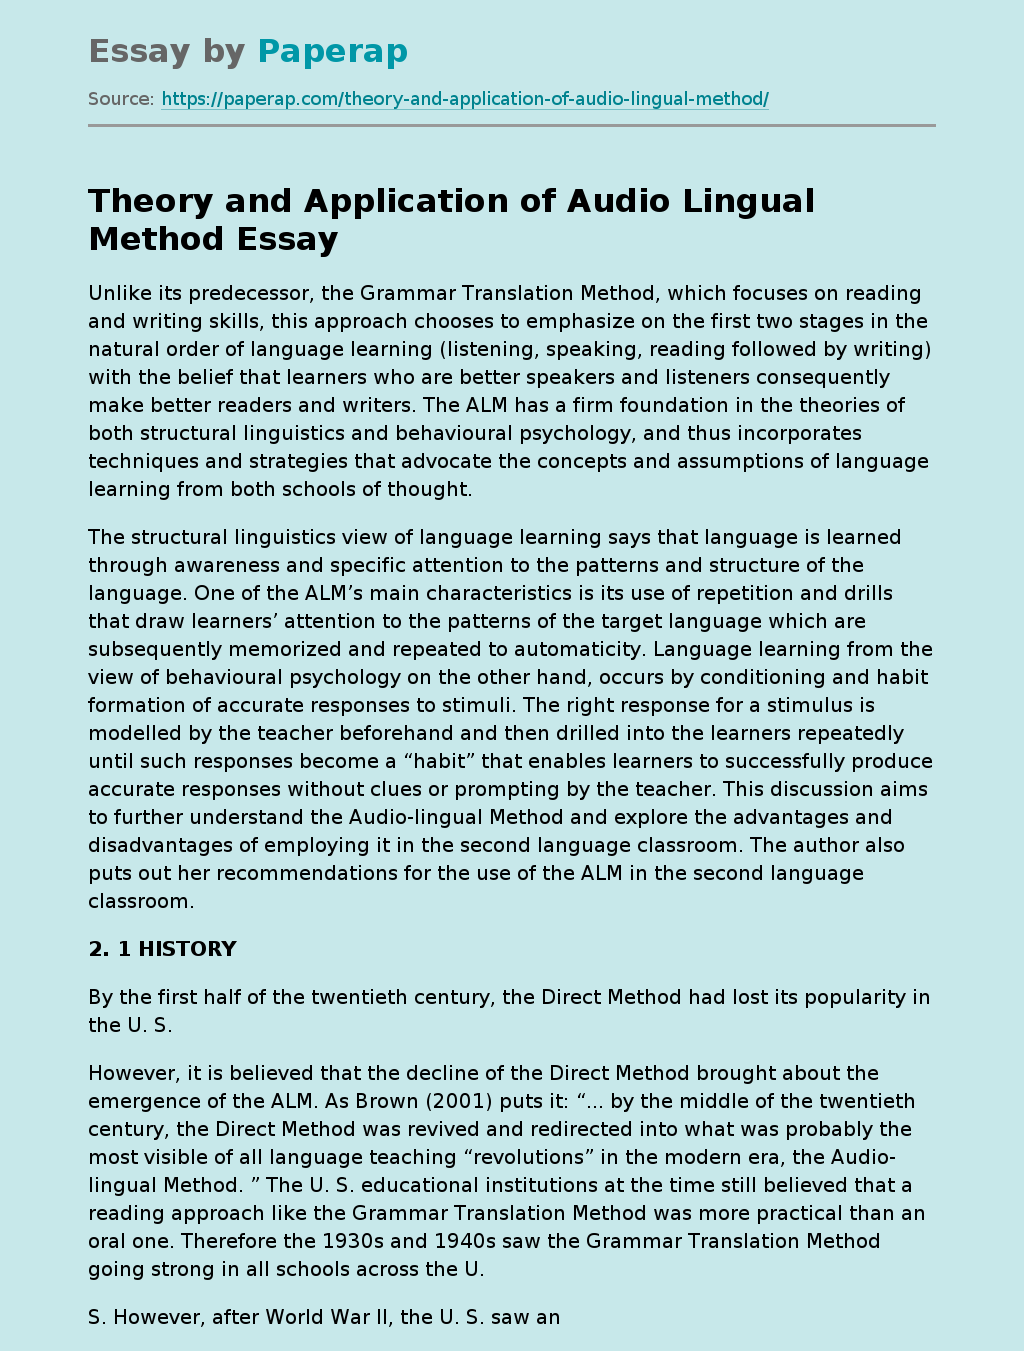 Theory and Application of Audio Lingual Method